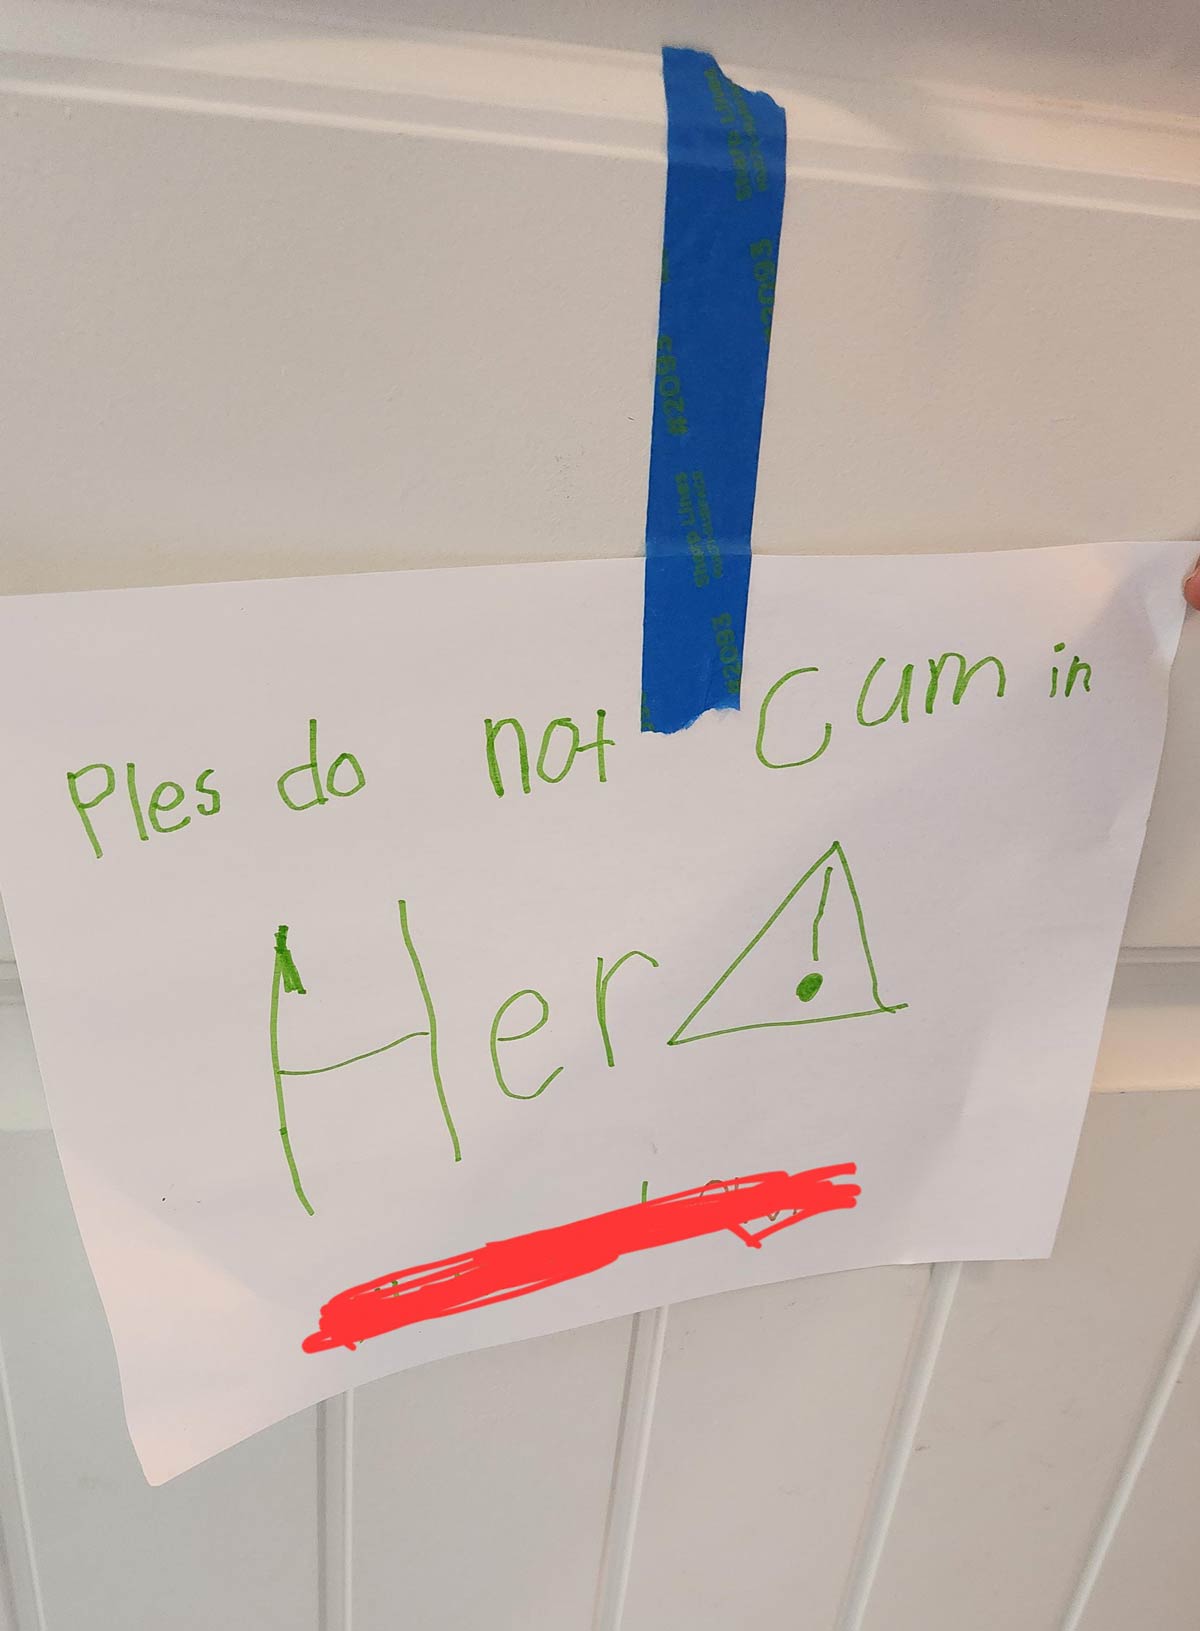 My friend's kids made this sign while in timeout